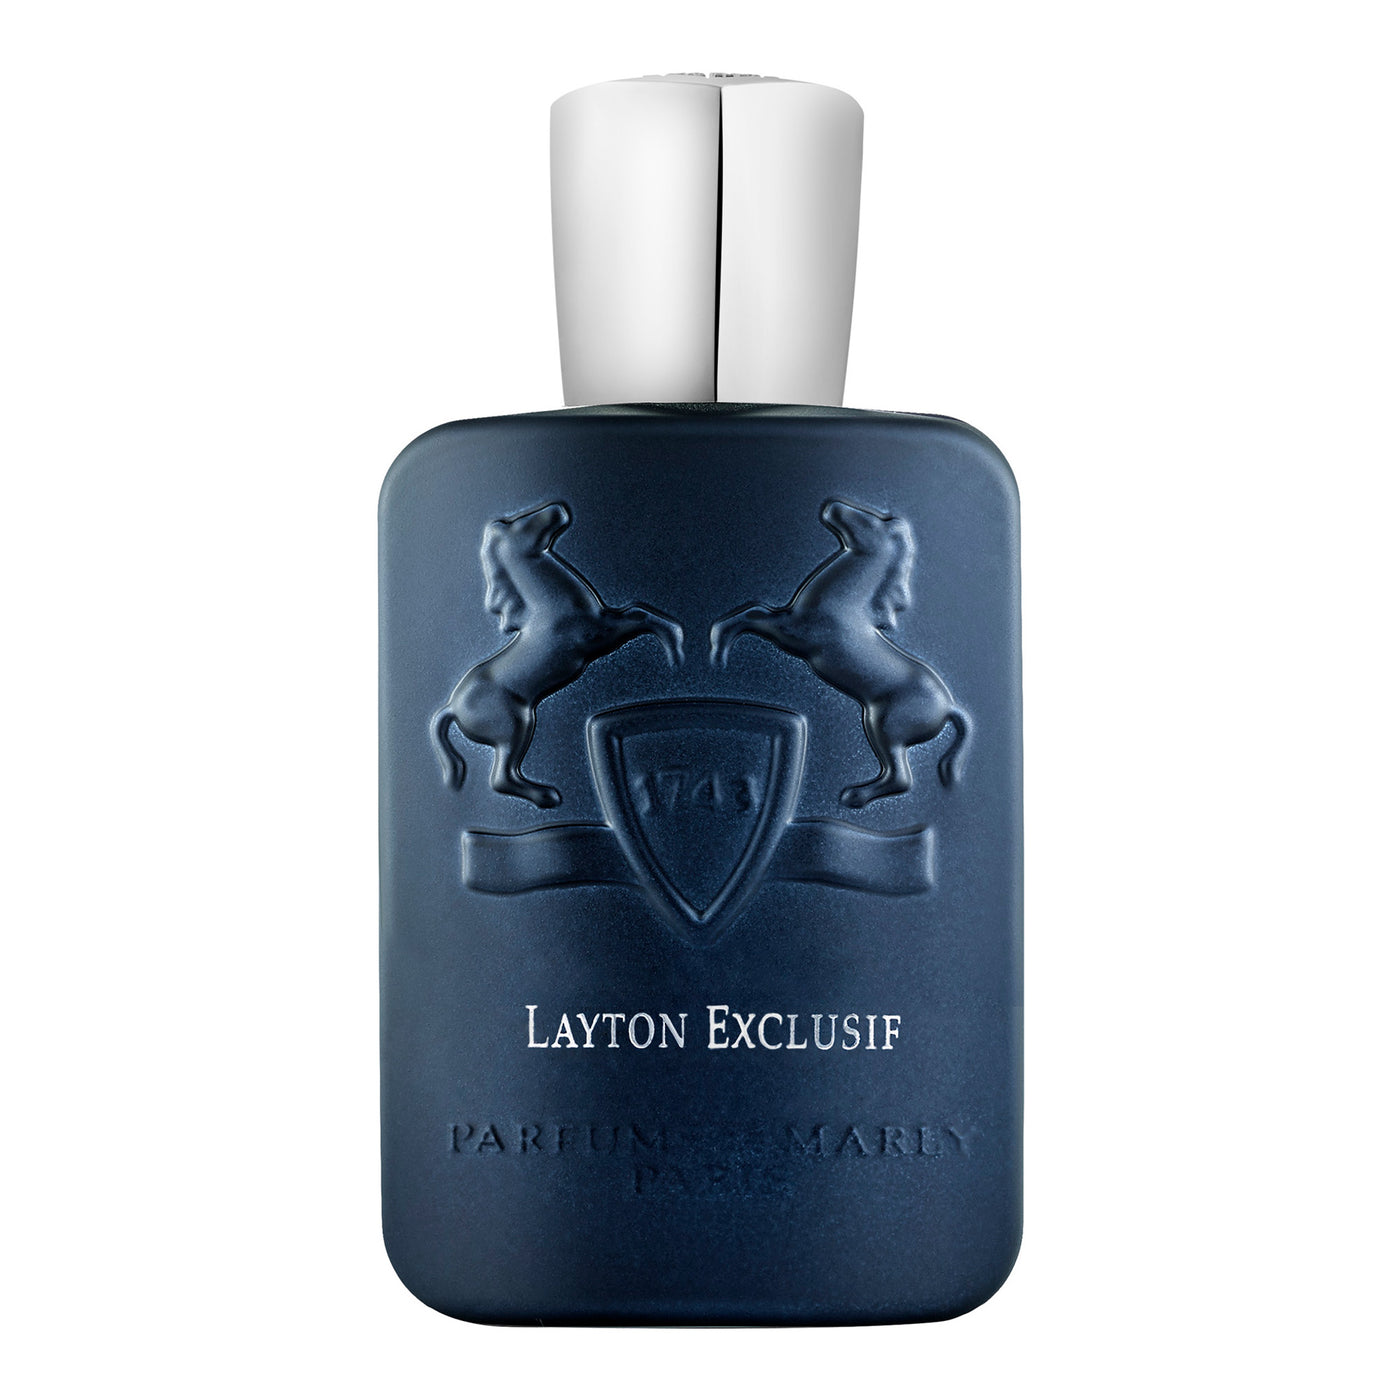 Parfums de Marly Layton Exclusif - 125ml - Gharyal by Collectibles 